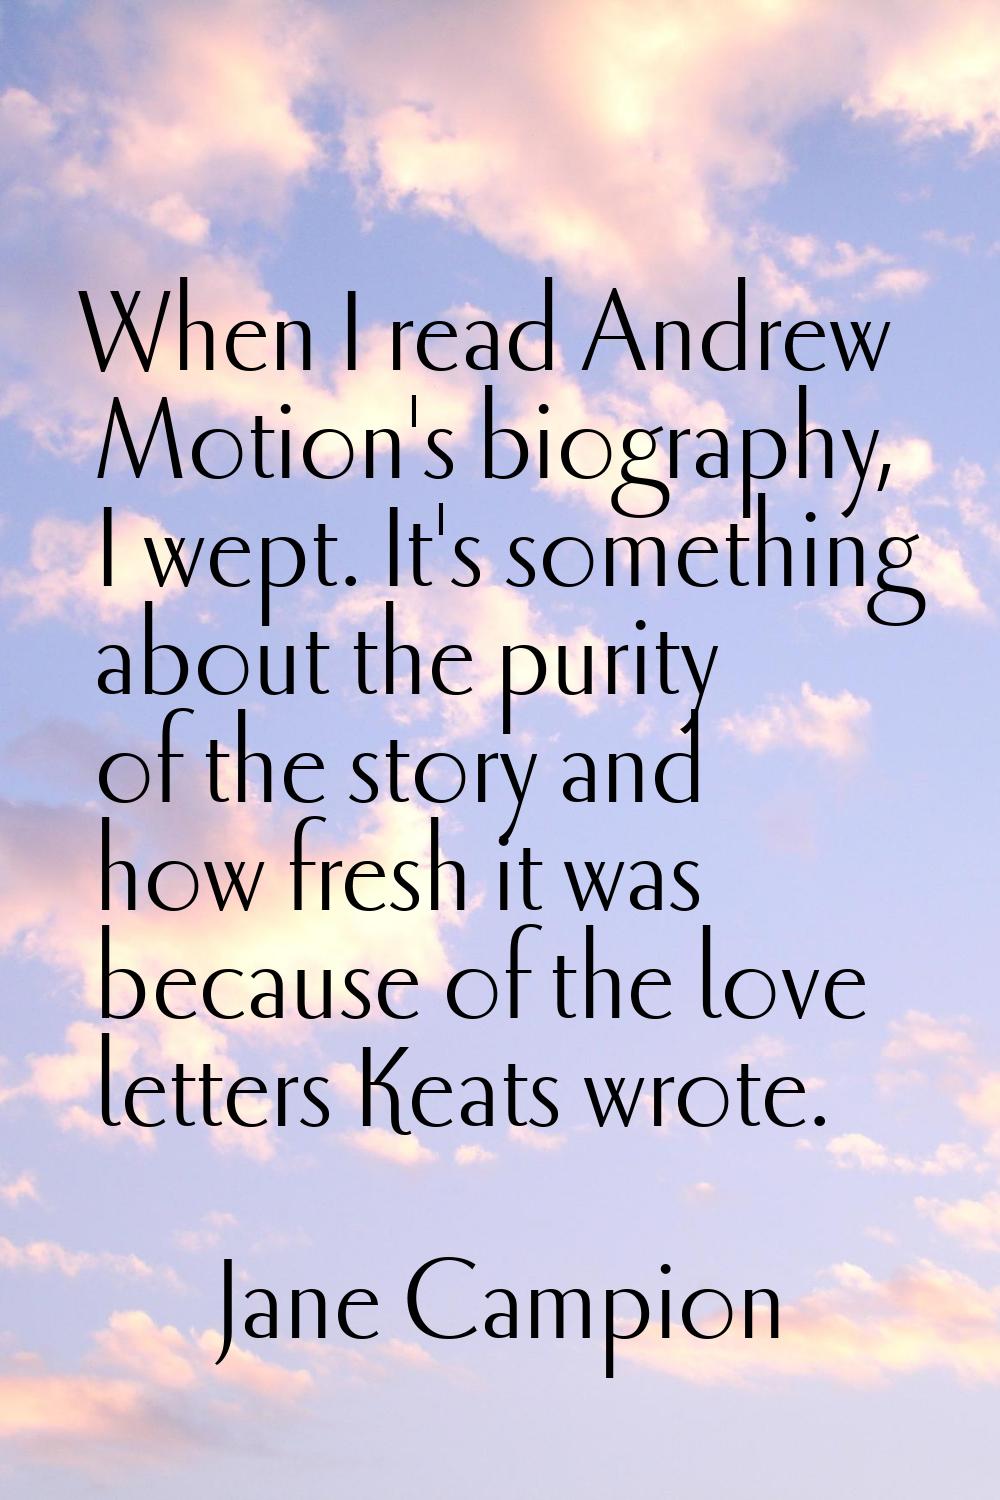 When I read Andrew Motion's biography, I wept. It's something about the purity of the story and how